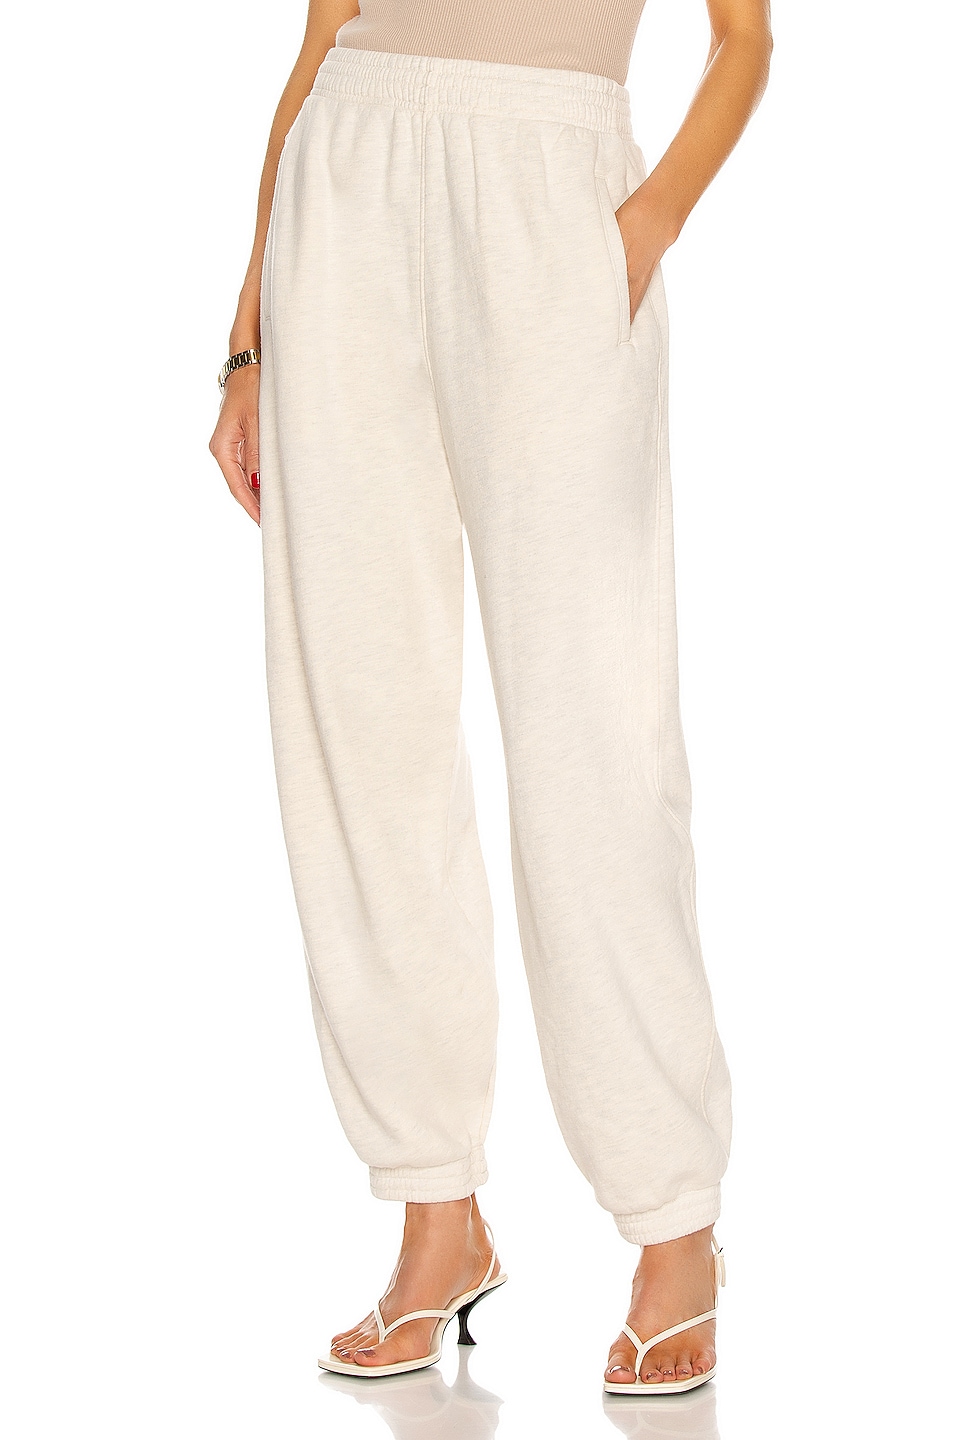 Image 1 of AGOLDE Balloon Sweatpant in Oatmeal Heather